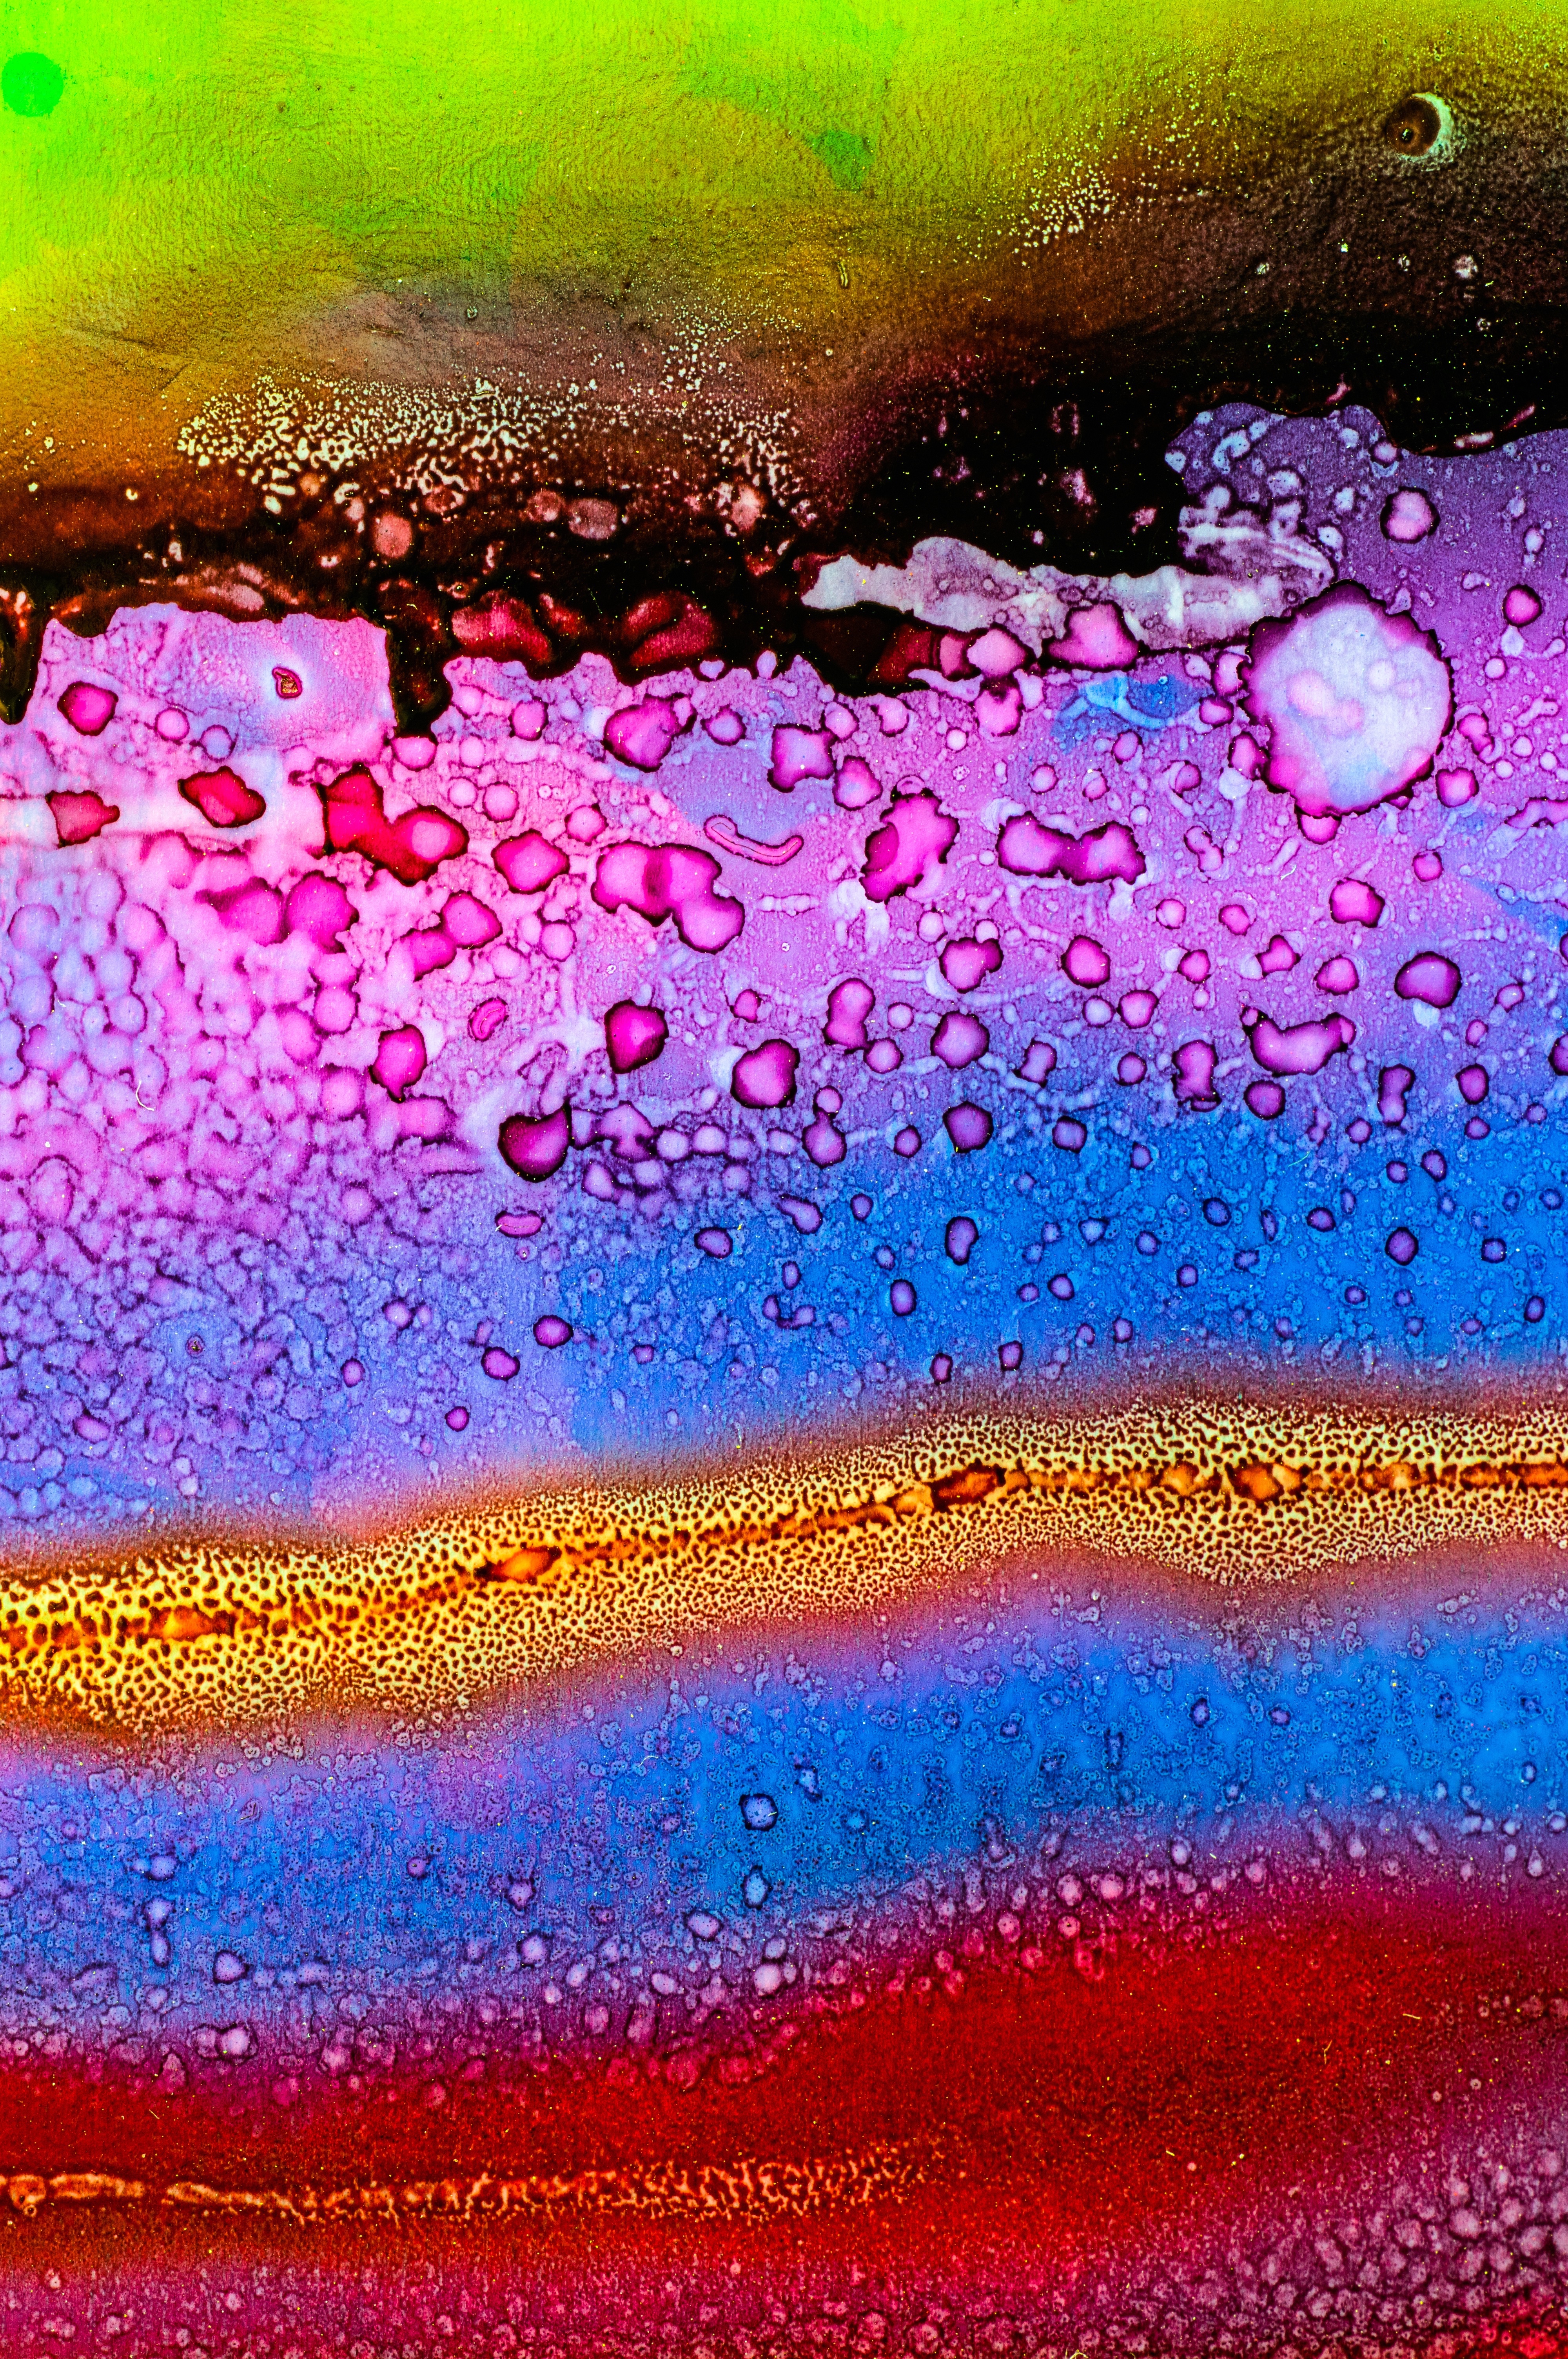 motley, abstract, multicolored, structure, close up, stains, spots, microscopic